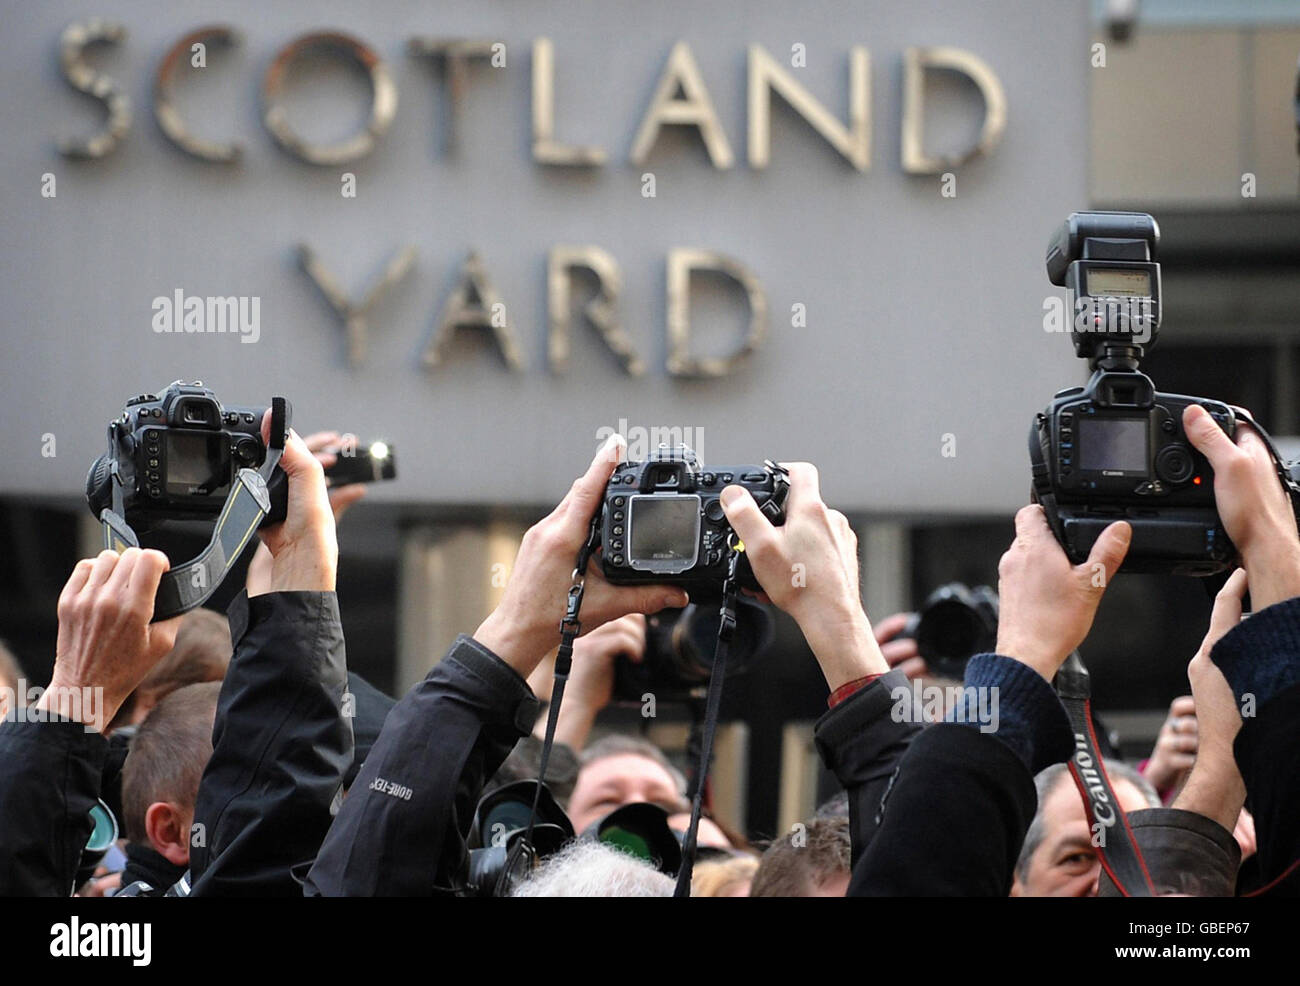 Photographers outside New Scotland Yard in London today protesting at a new anti-terror law. Photojournalists say Section 76 of the Counter Terrorism Act, which became law today, could see them arrested for doing their job. Stock Photo